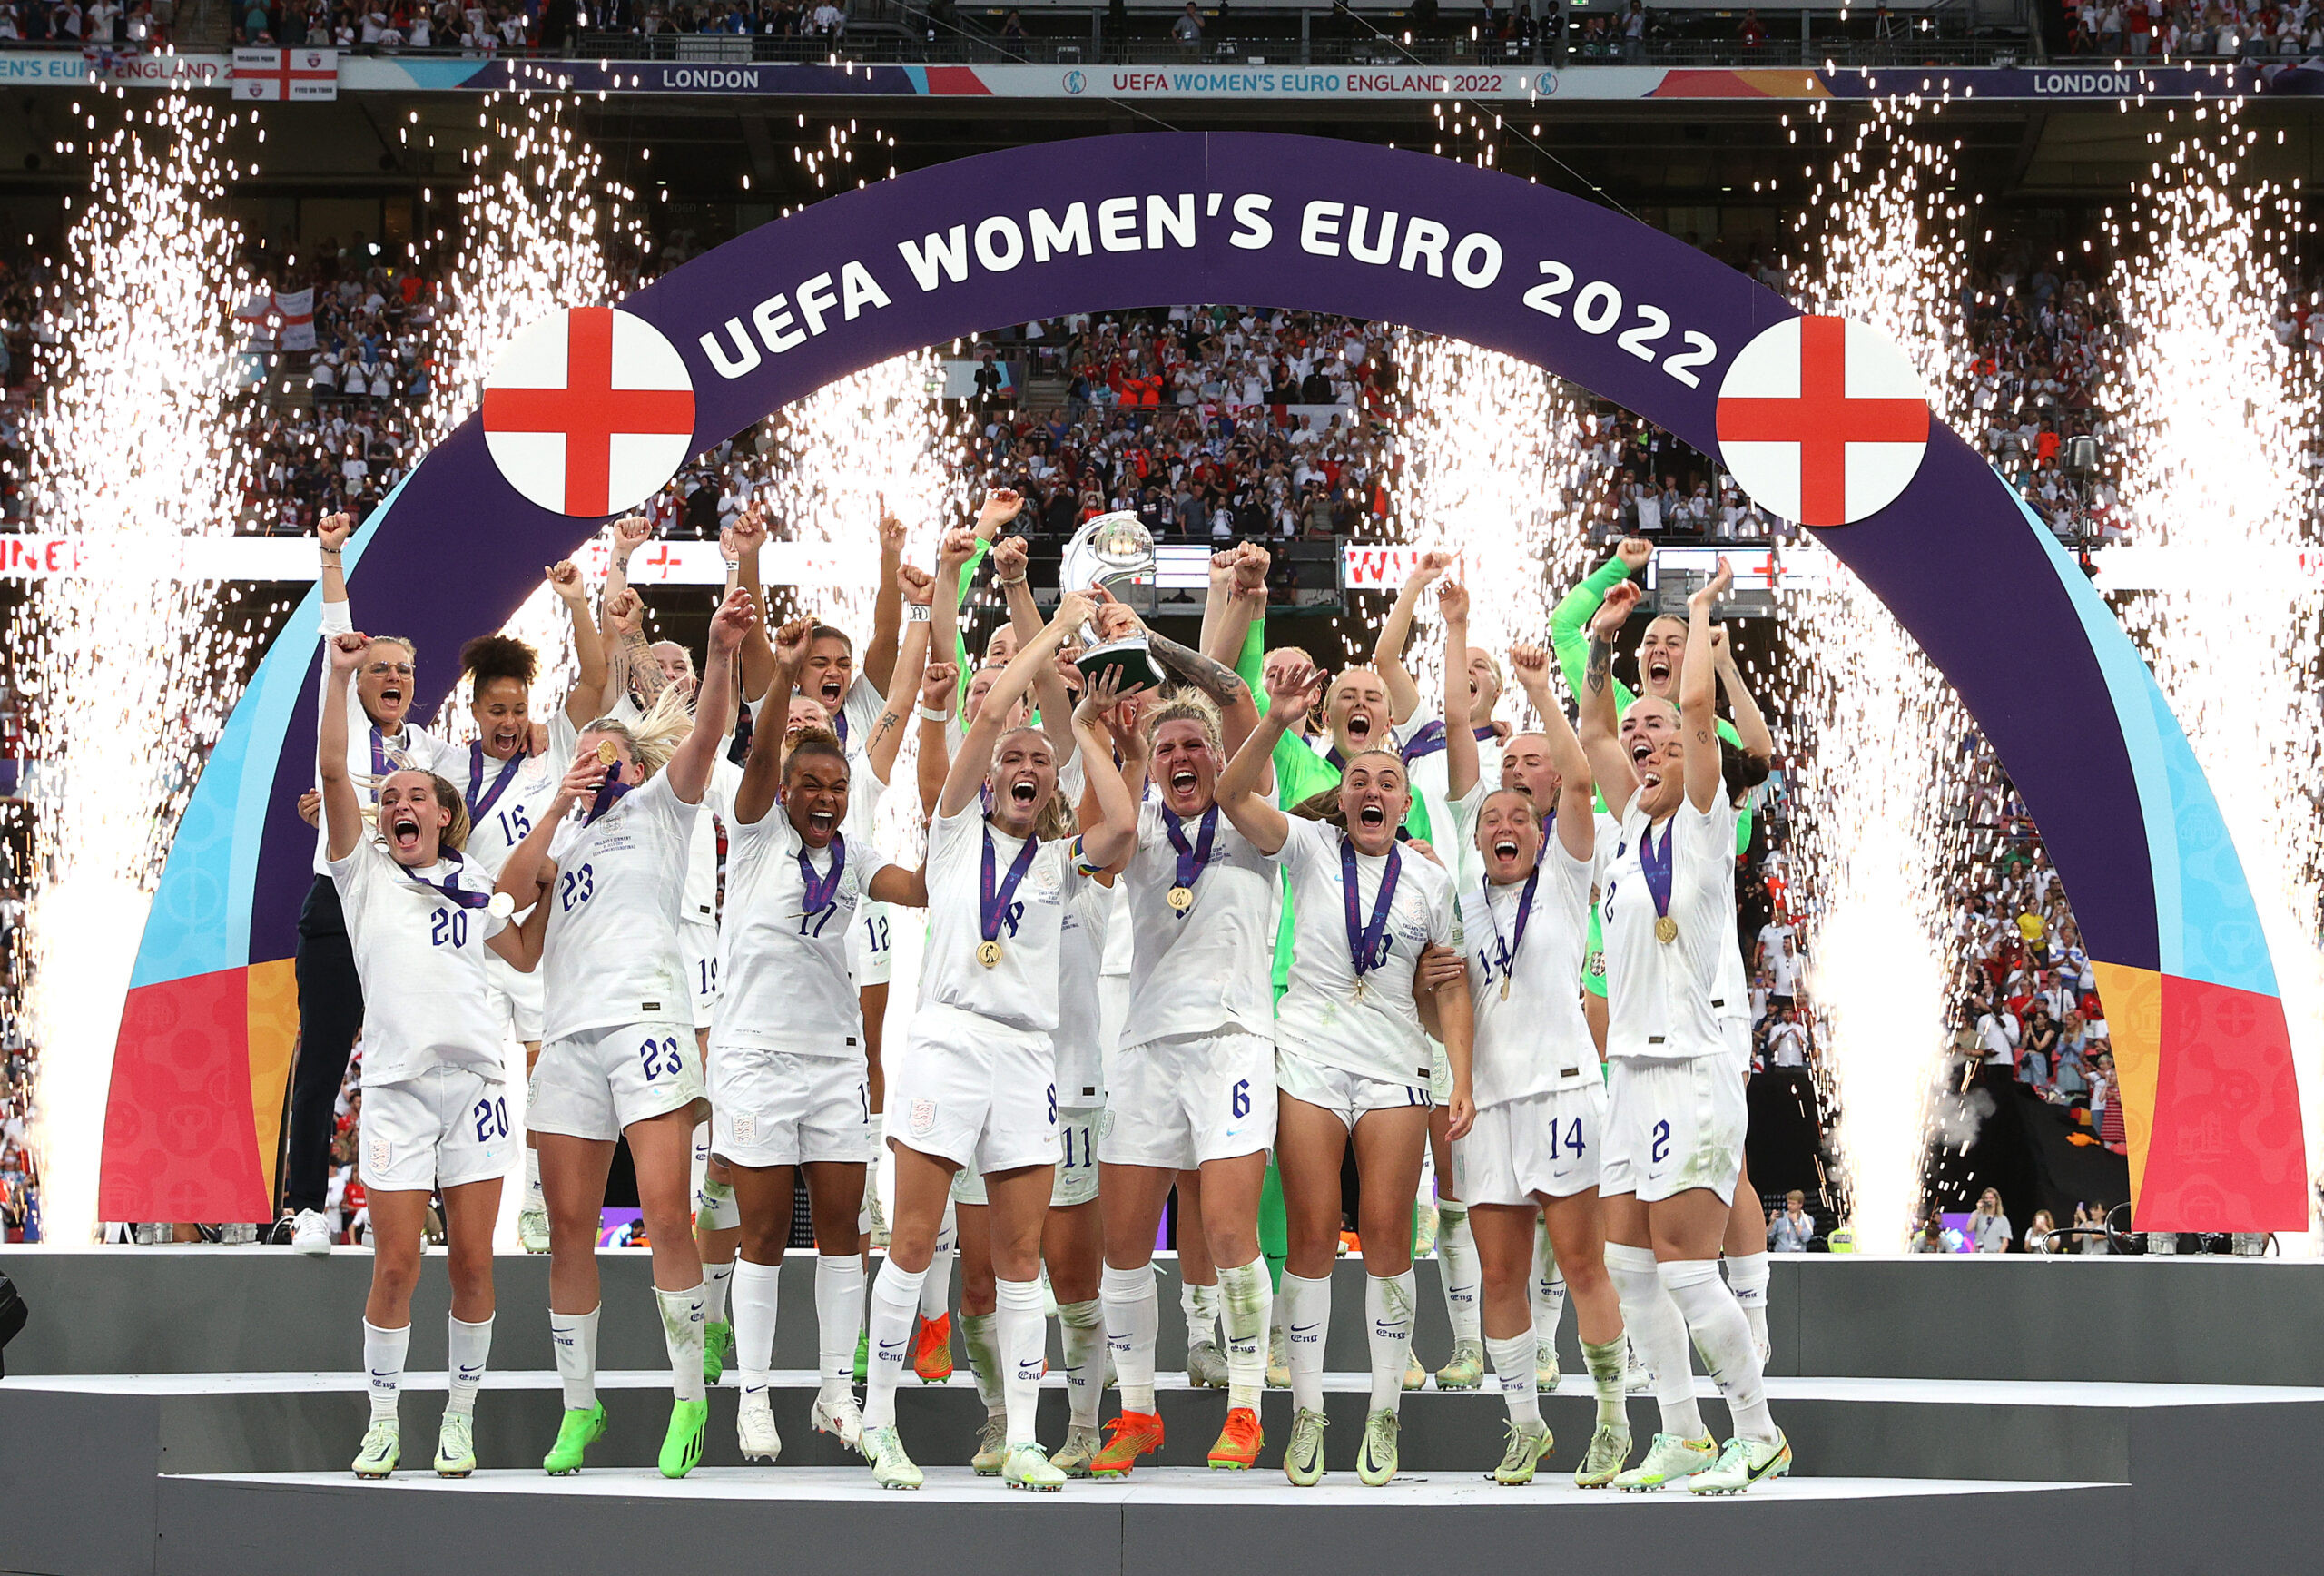 Photo of 'World will change' as England sweep to Euro title